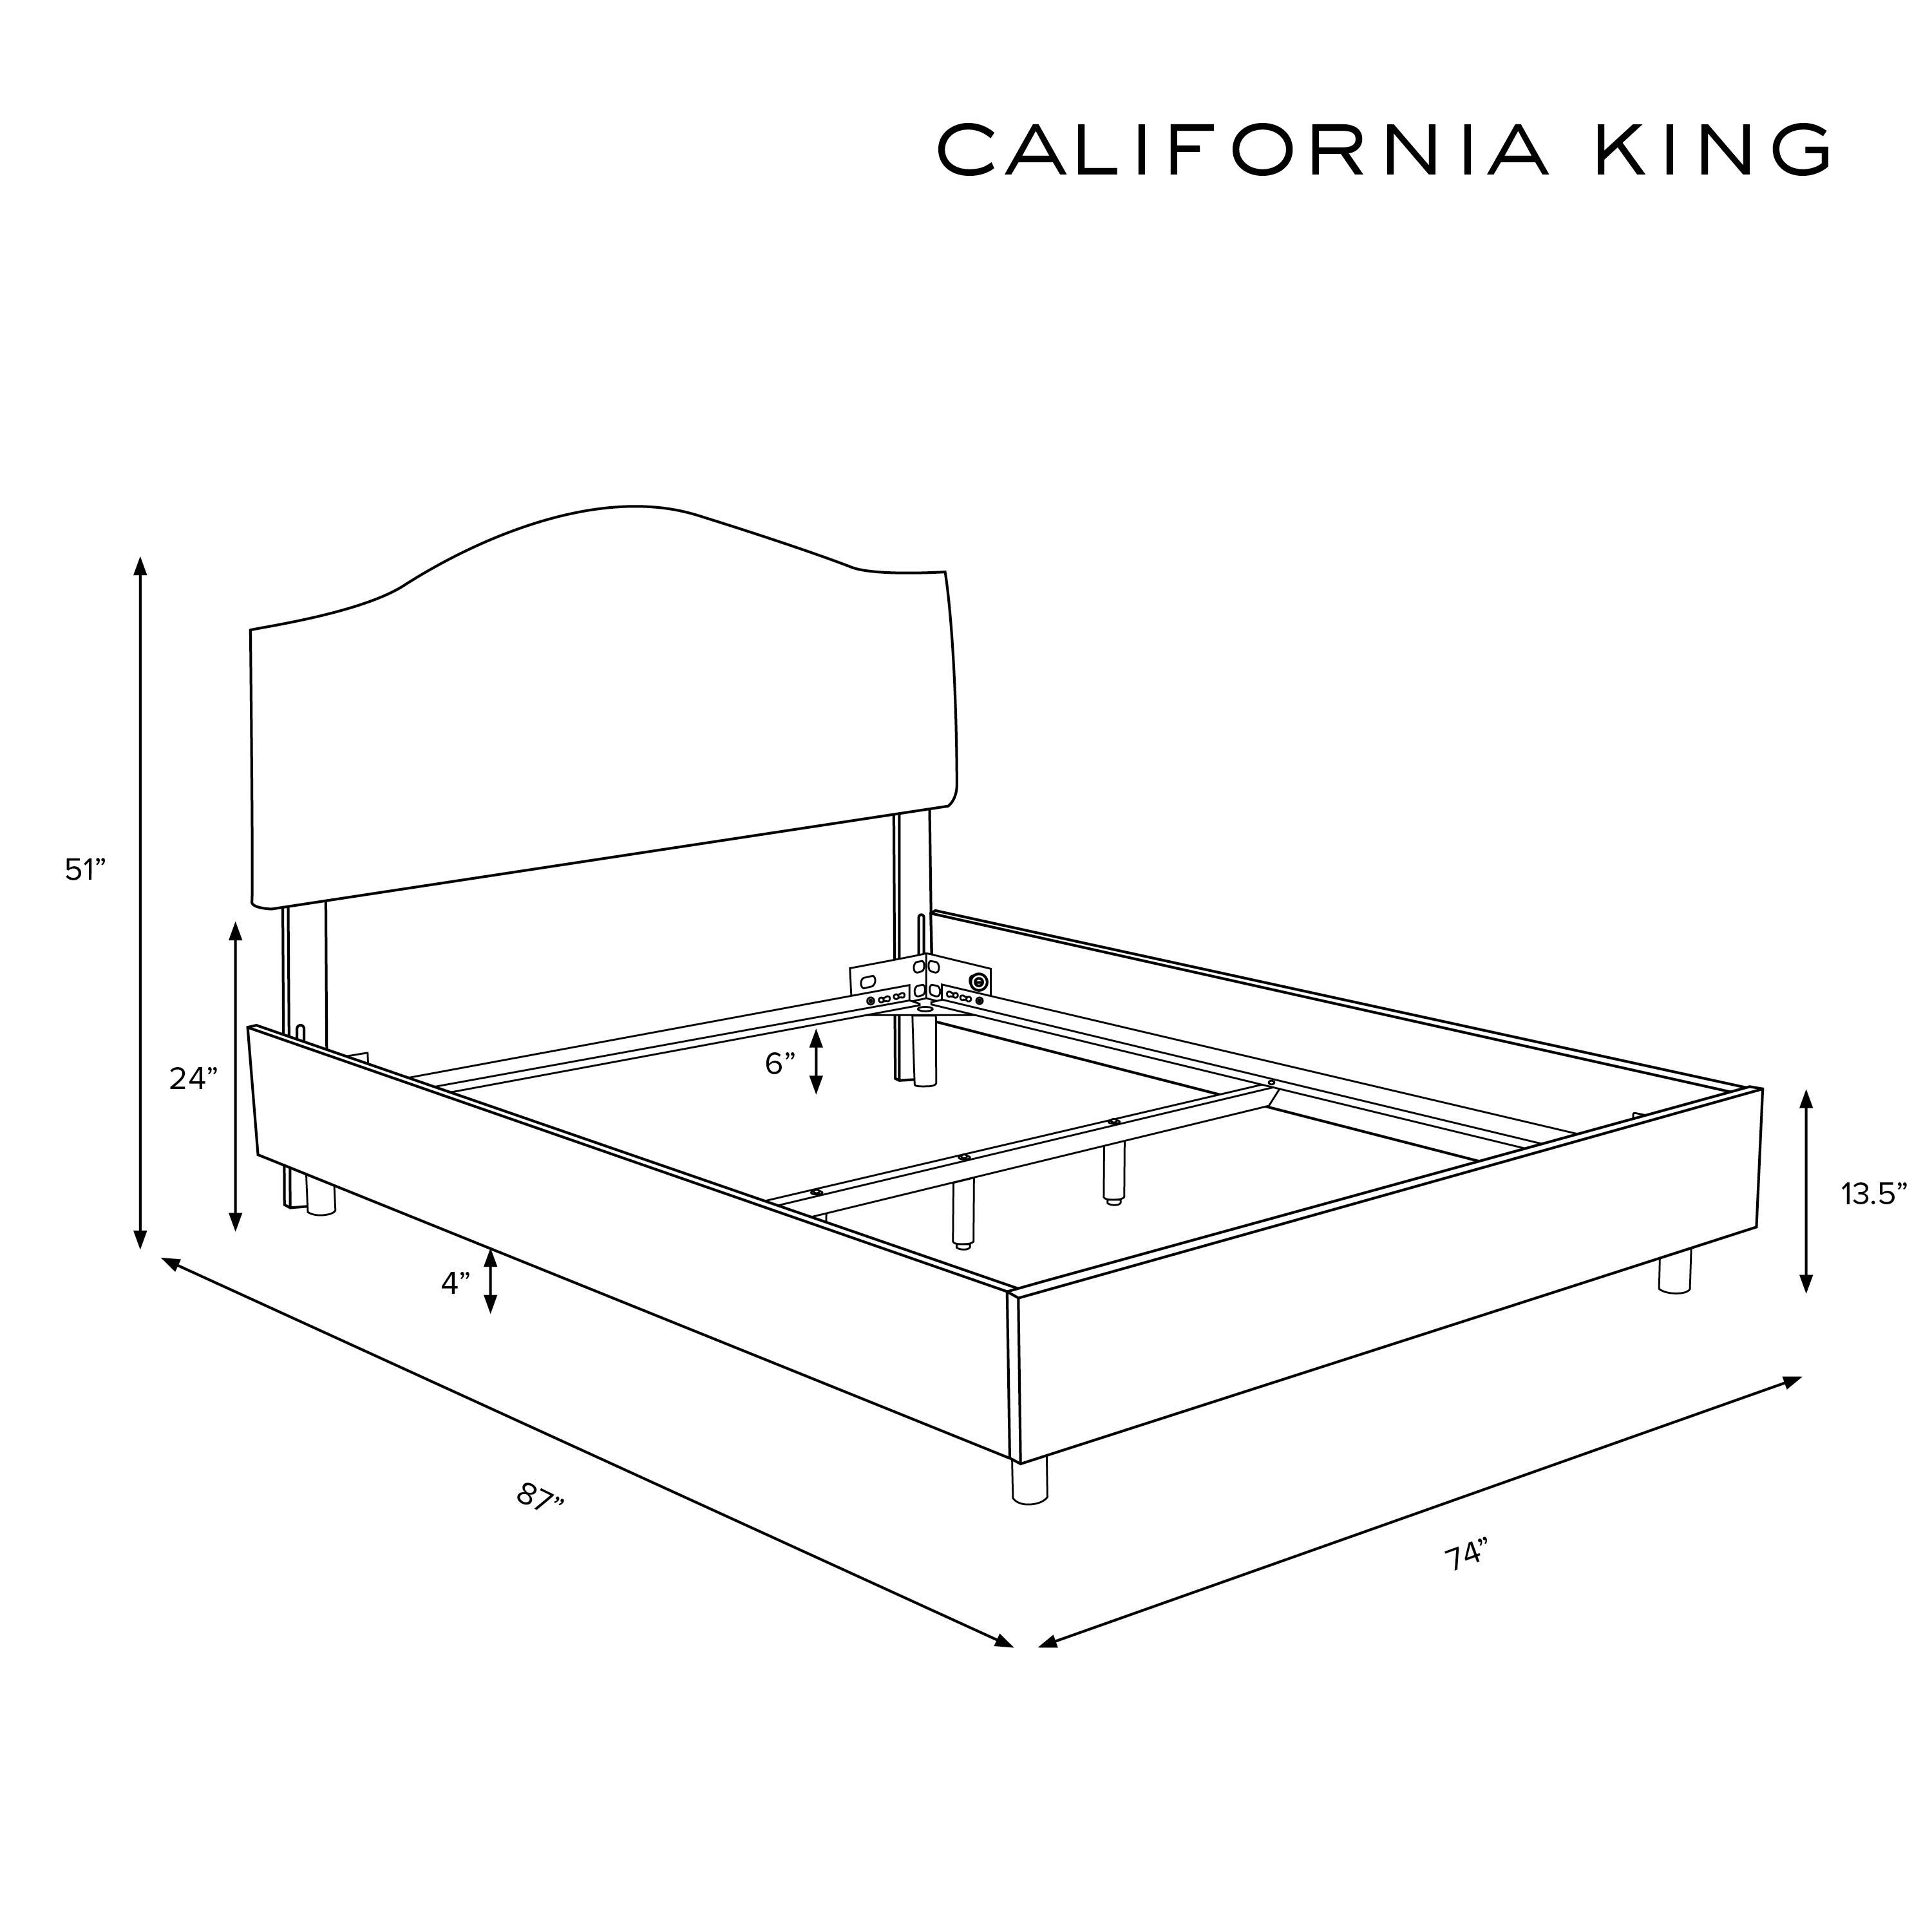 California King Kenmore Bed in Zuma White - Image 5